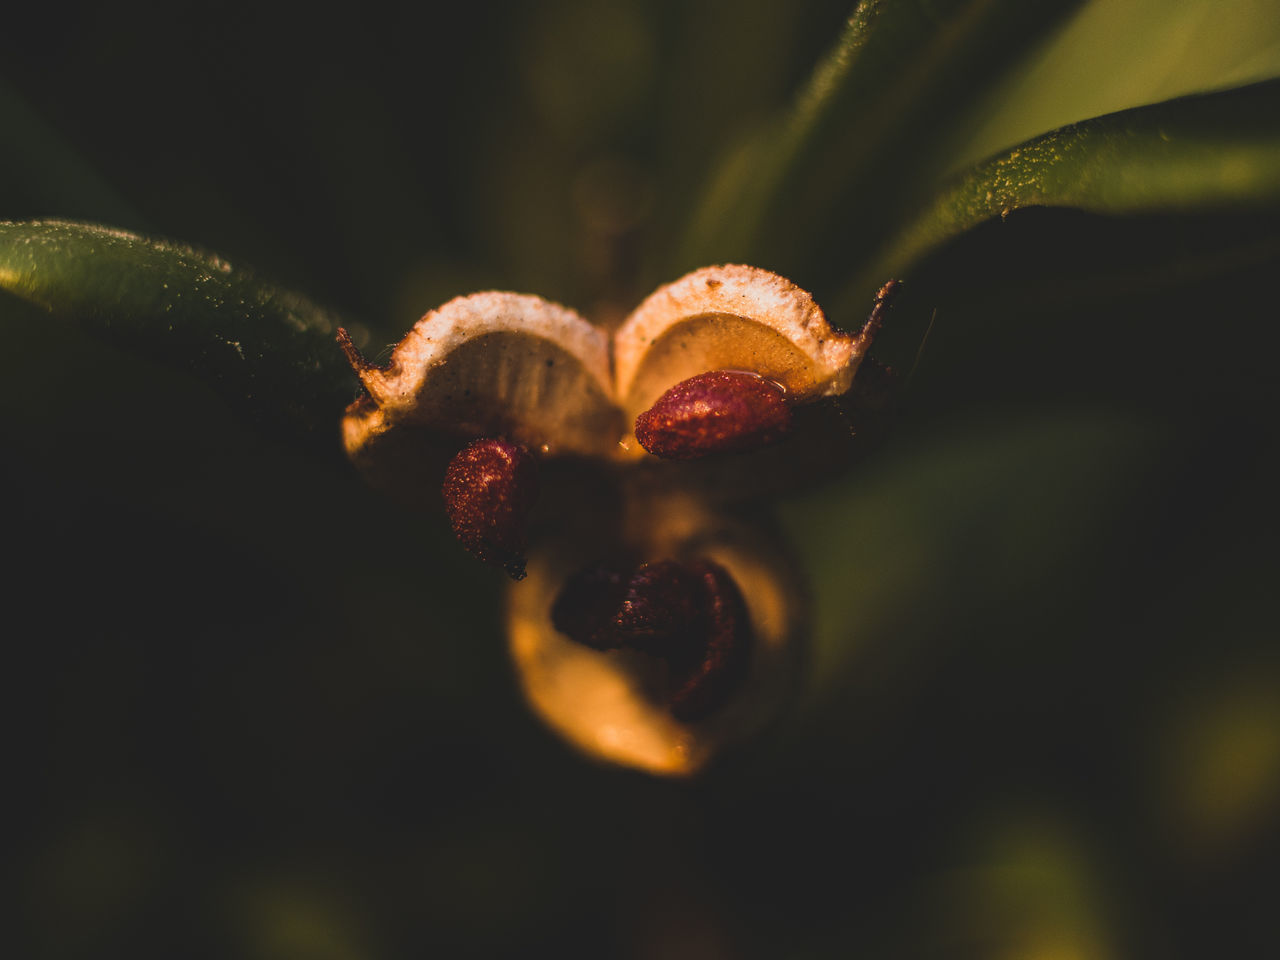 selective focus, close-up, growth, no people, plant, nature, freshness, beauty in nature, food and drink, food, leaf, day, plant part, vulnerability, outdoors, fragility, healthy eating, flower, fruit, nut